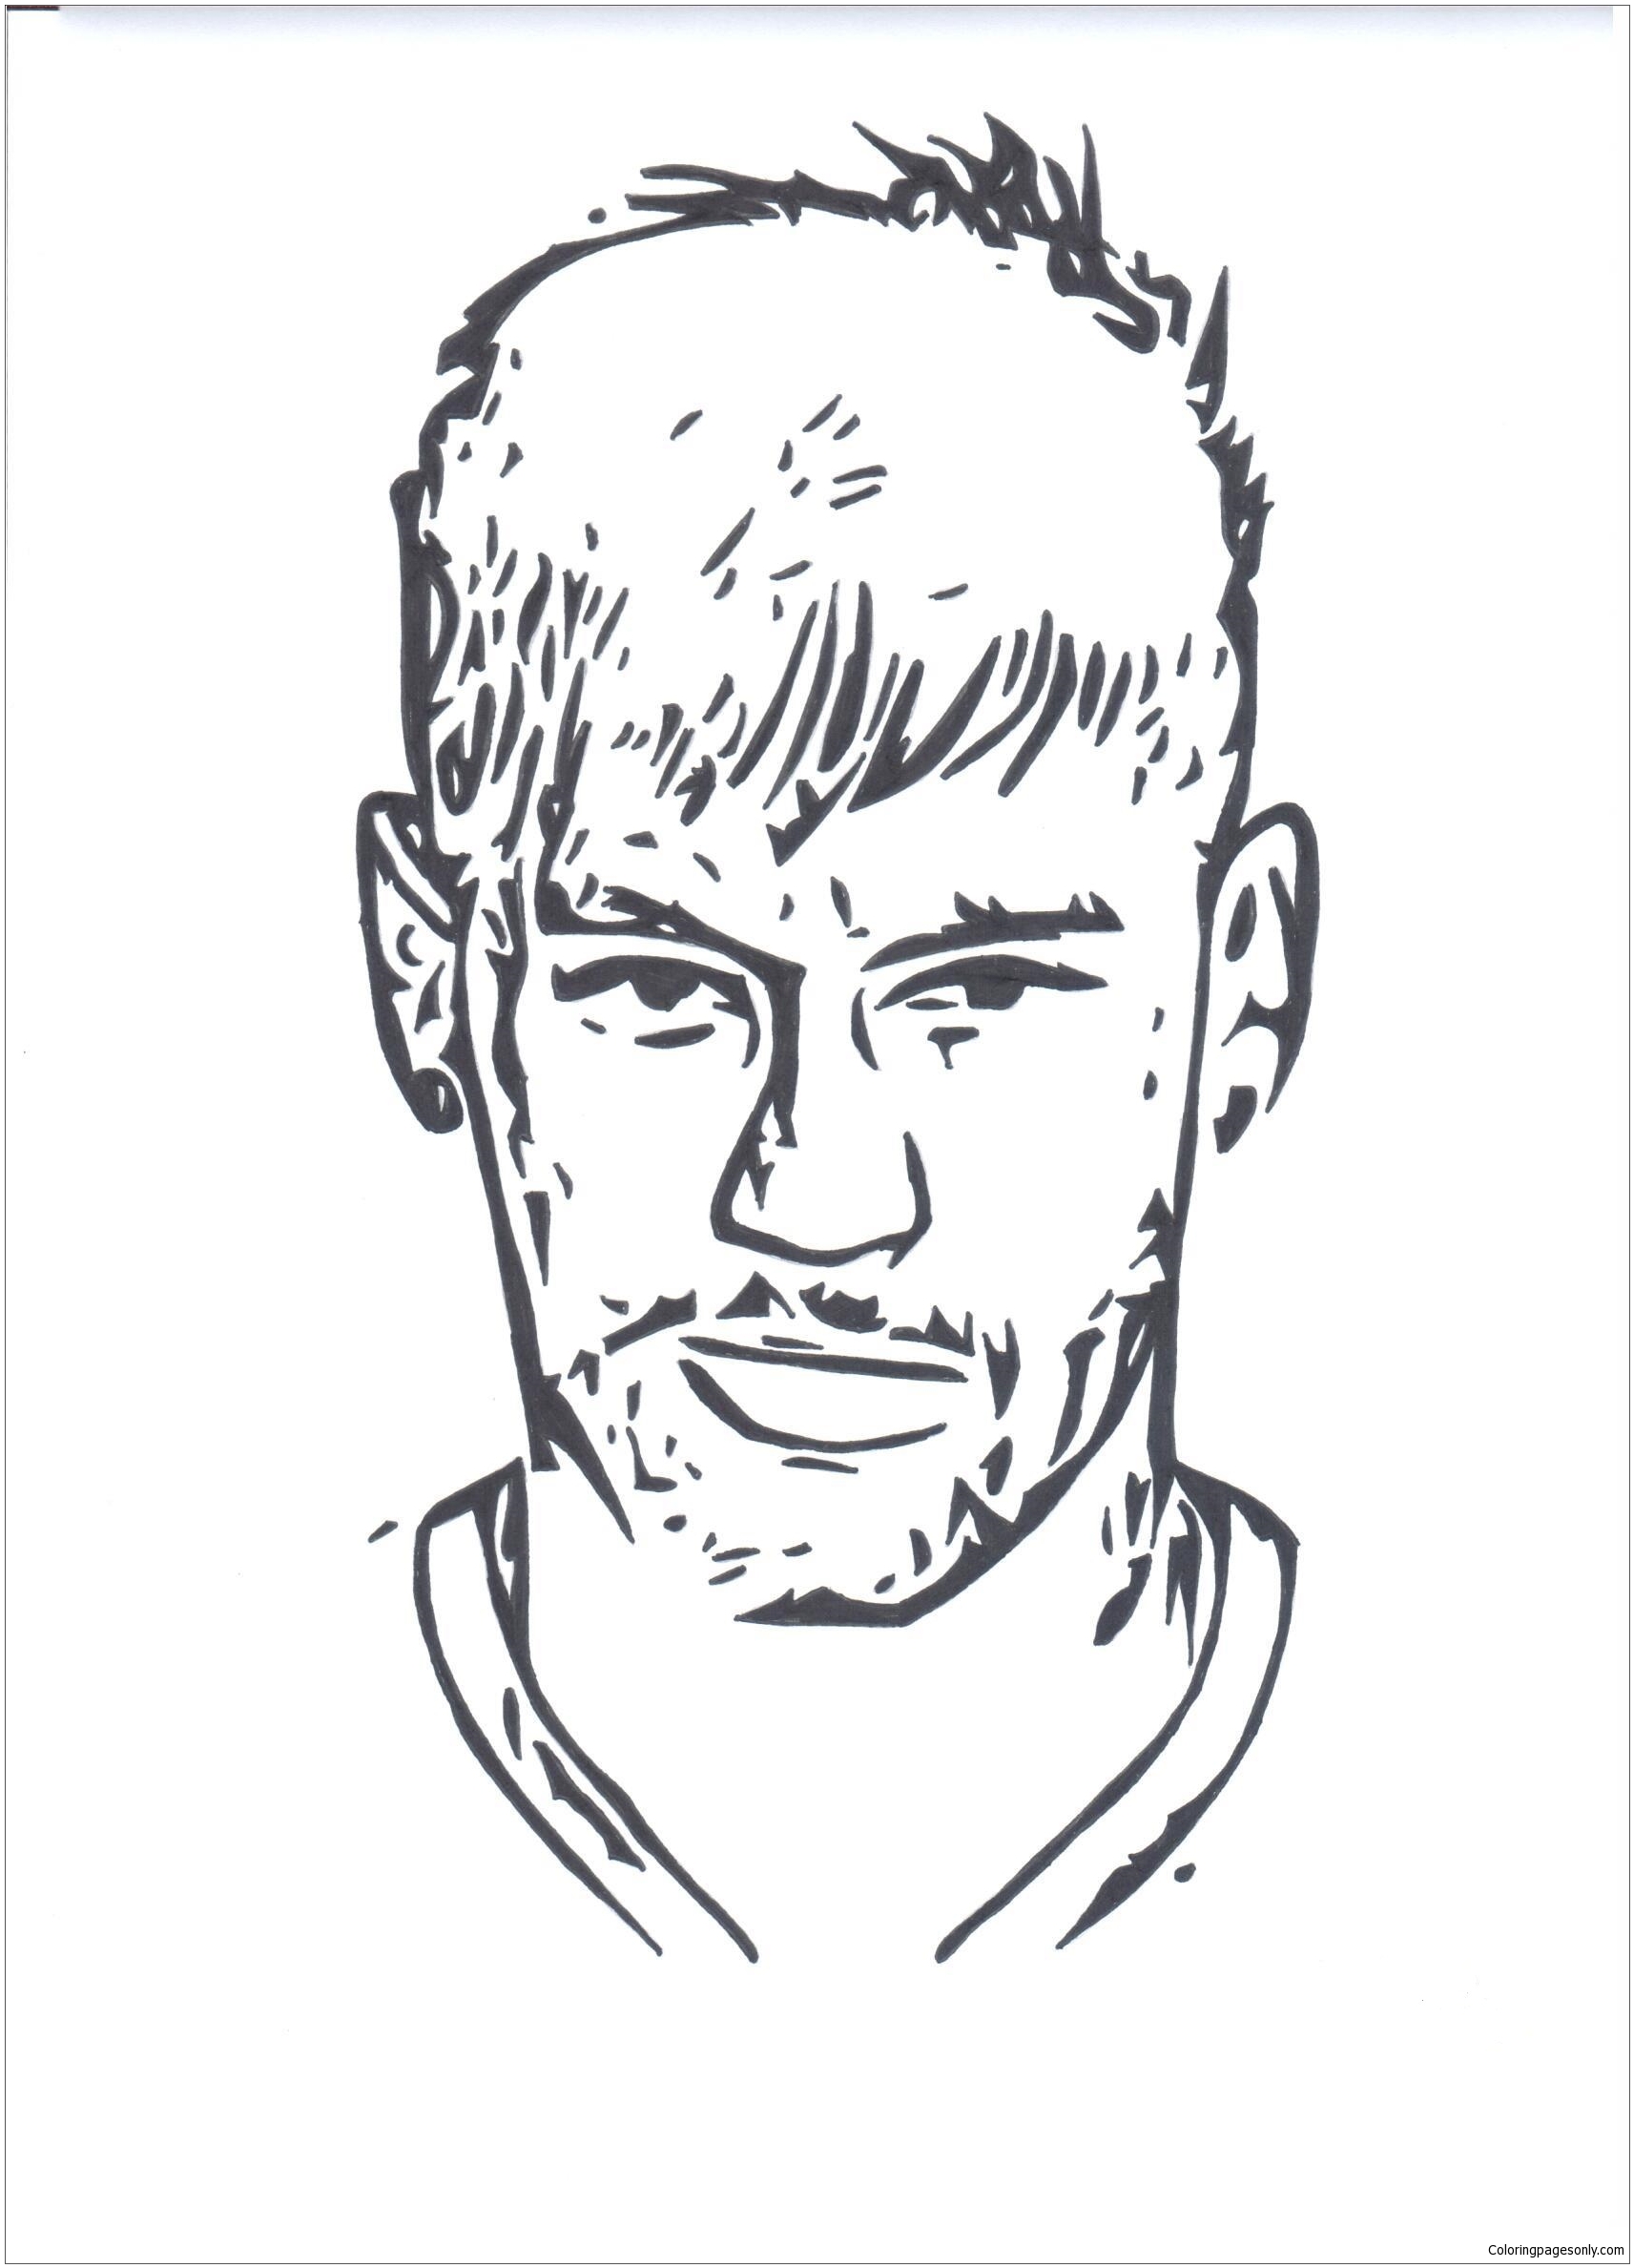 Neymar-image 7 Coloring Page